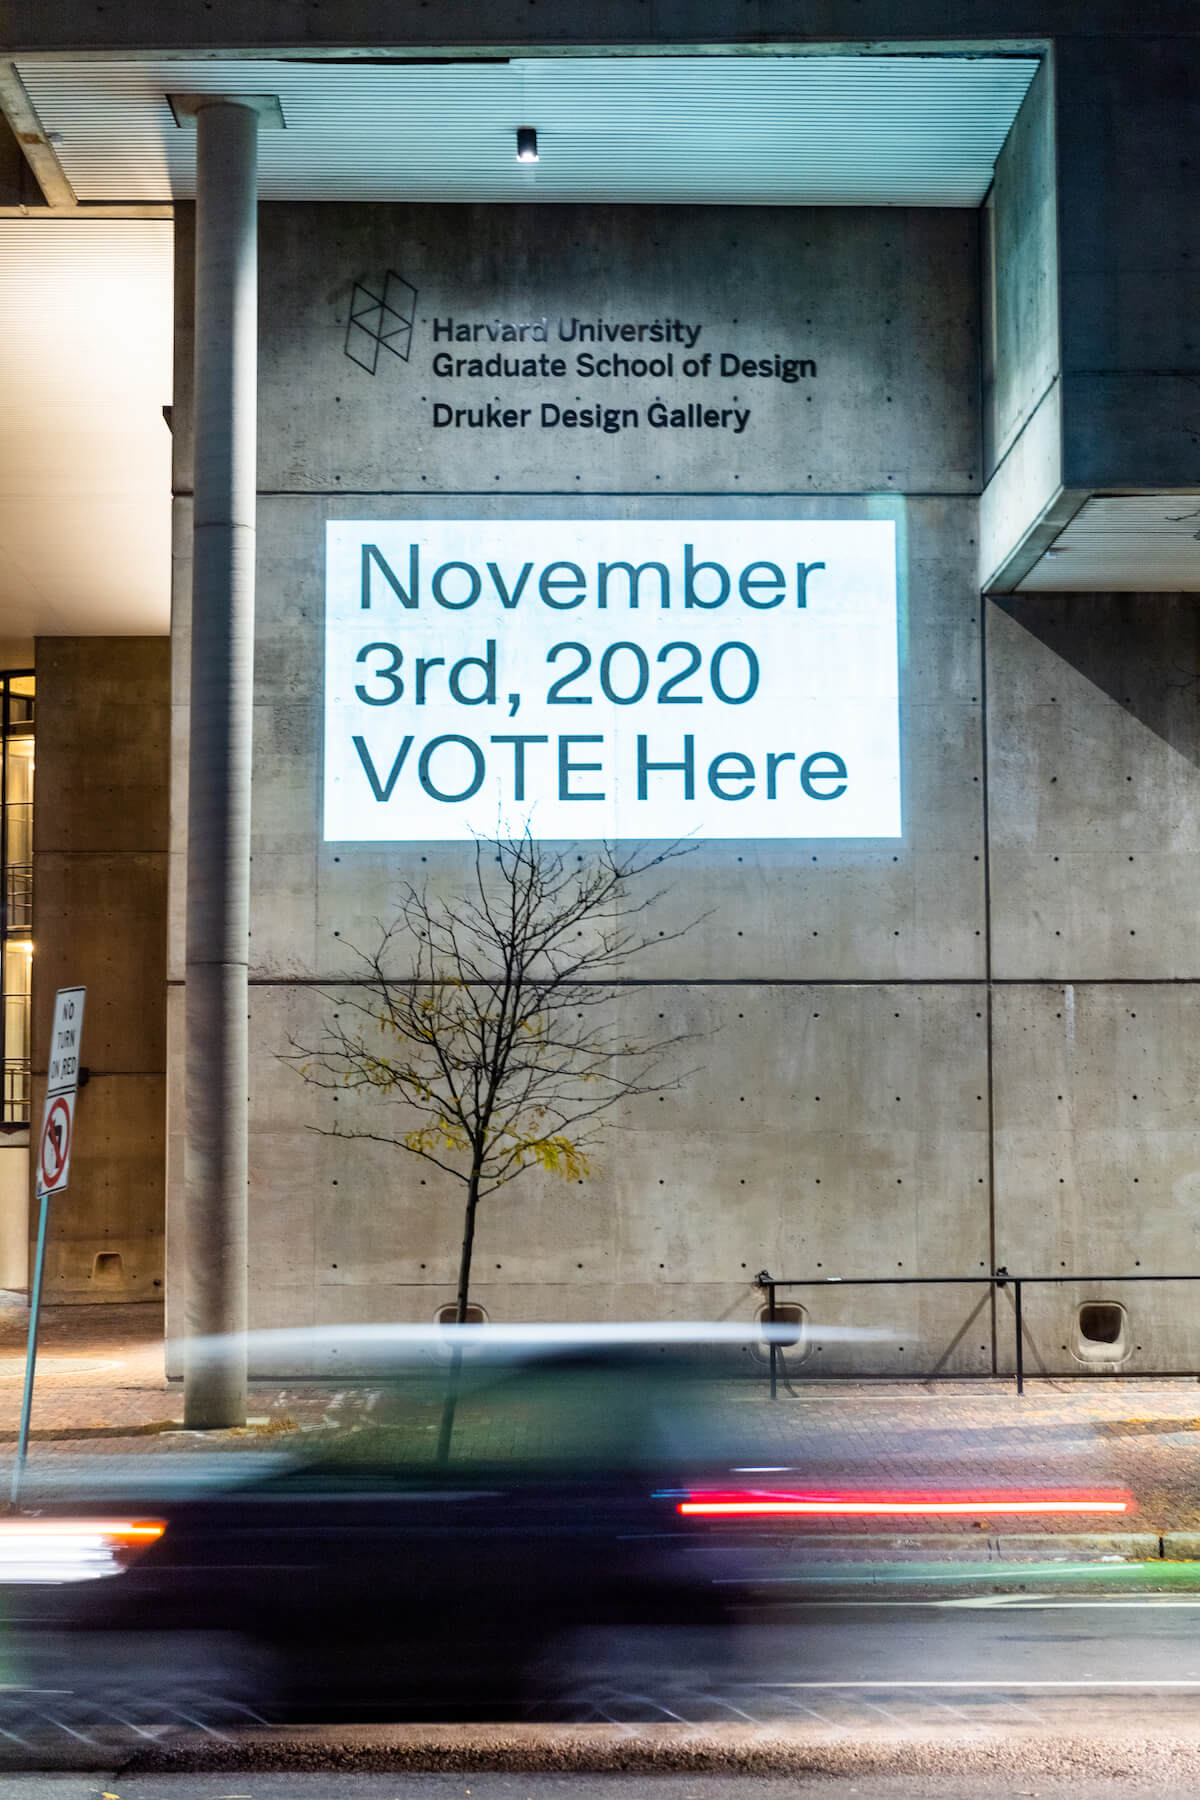 Gund Hall at night with projection reading "November 3rd, 2020 VOTE Here" illuminated on the side of the building.